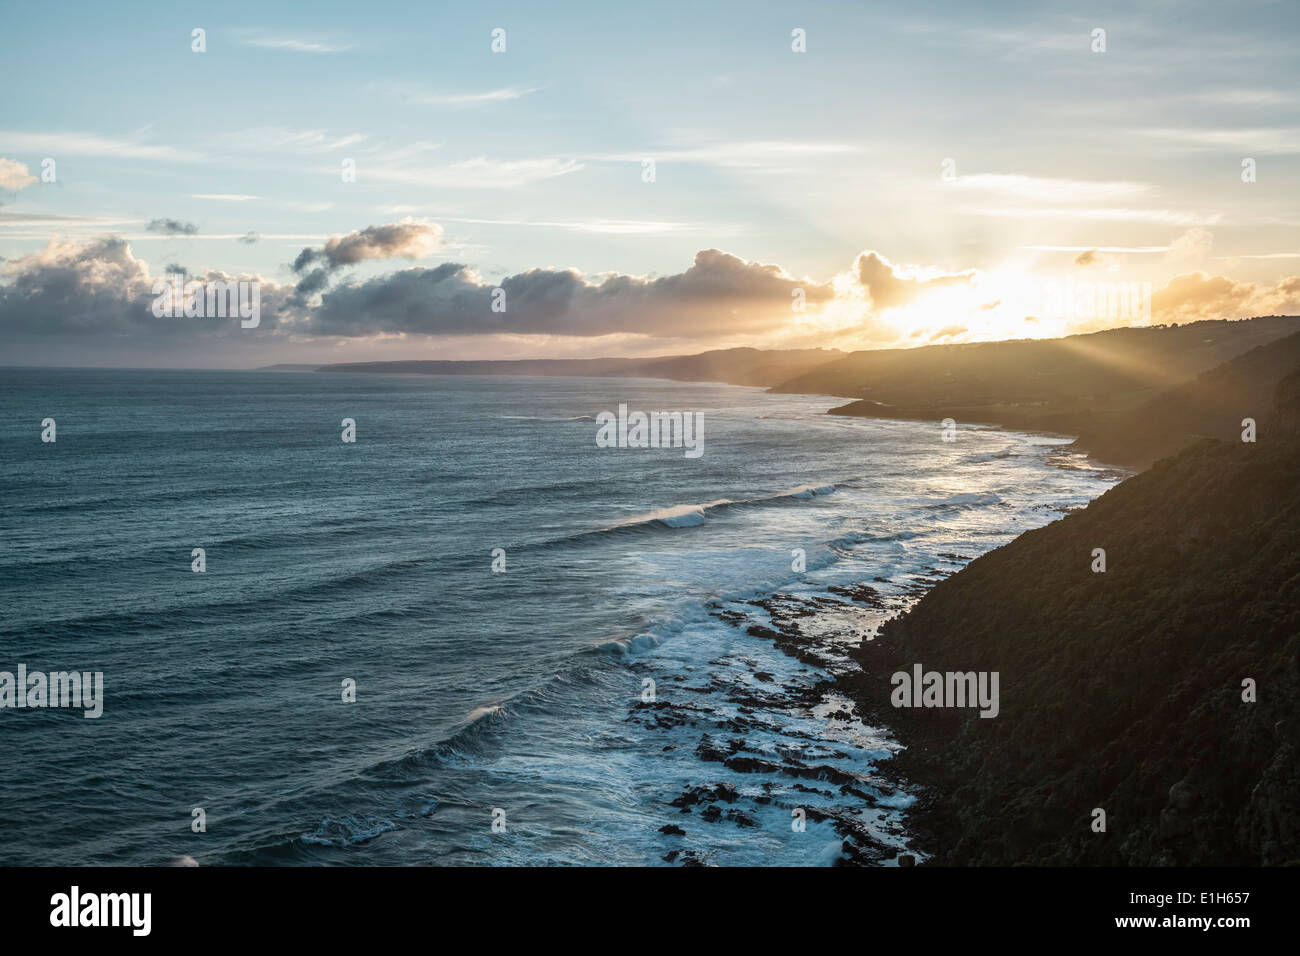 View from the Great Ocean Road at sunset, Victoria, Australia Stock Photo